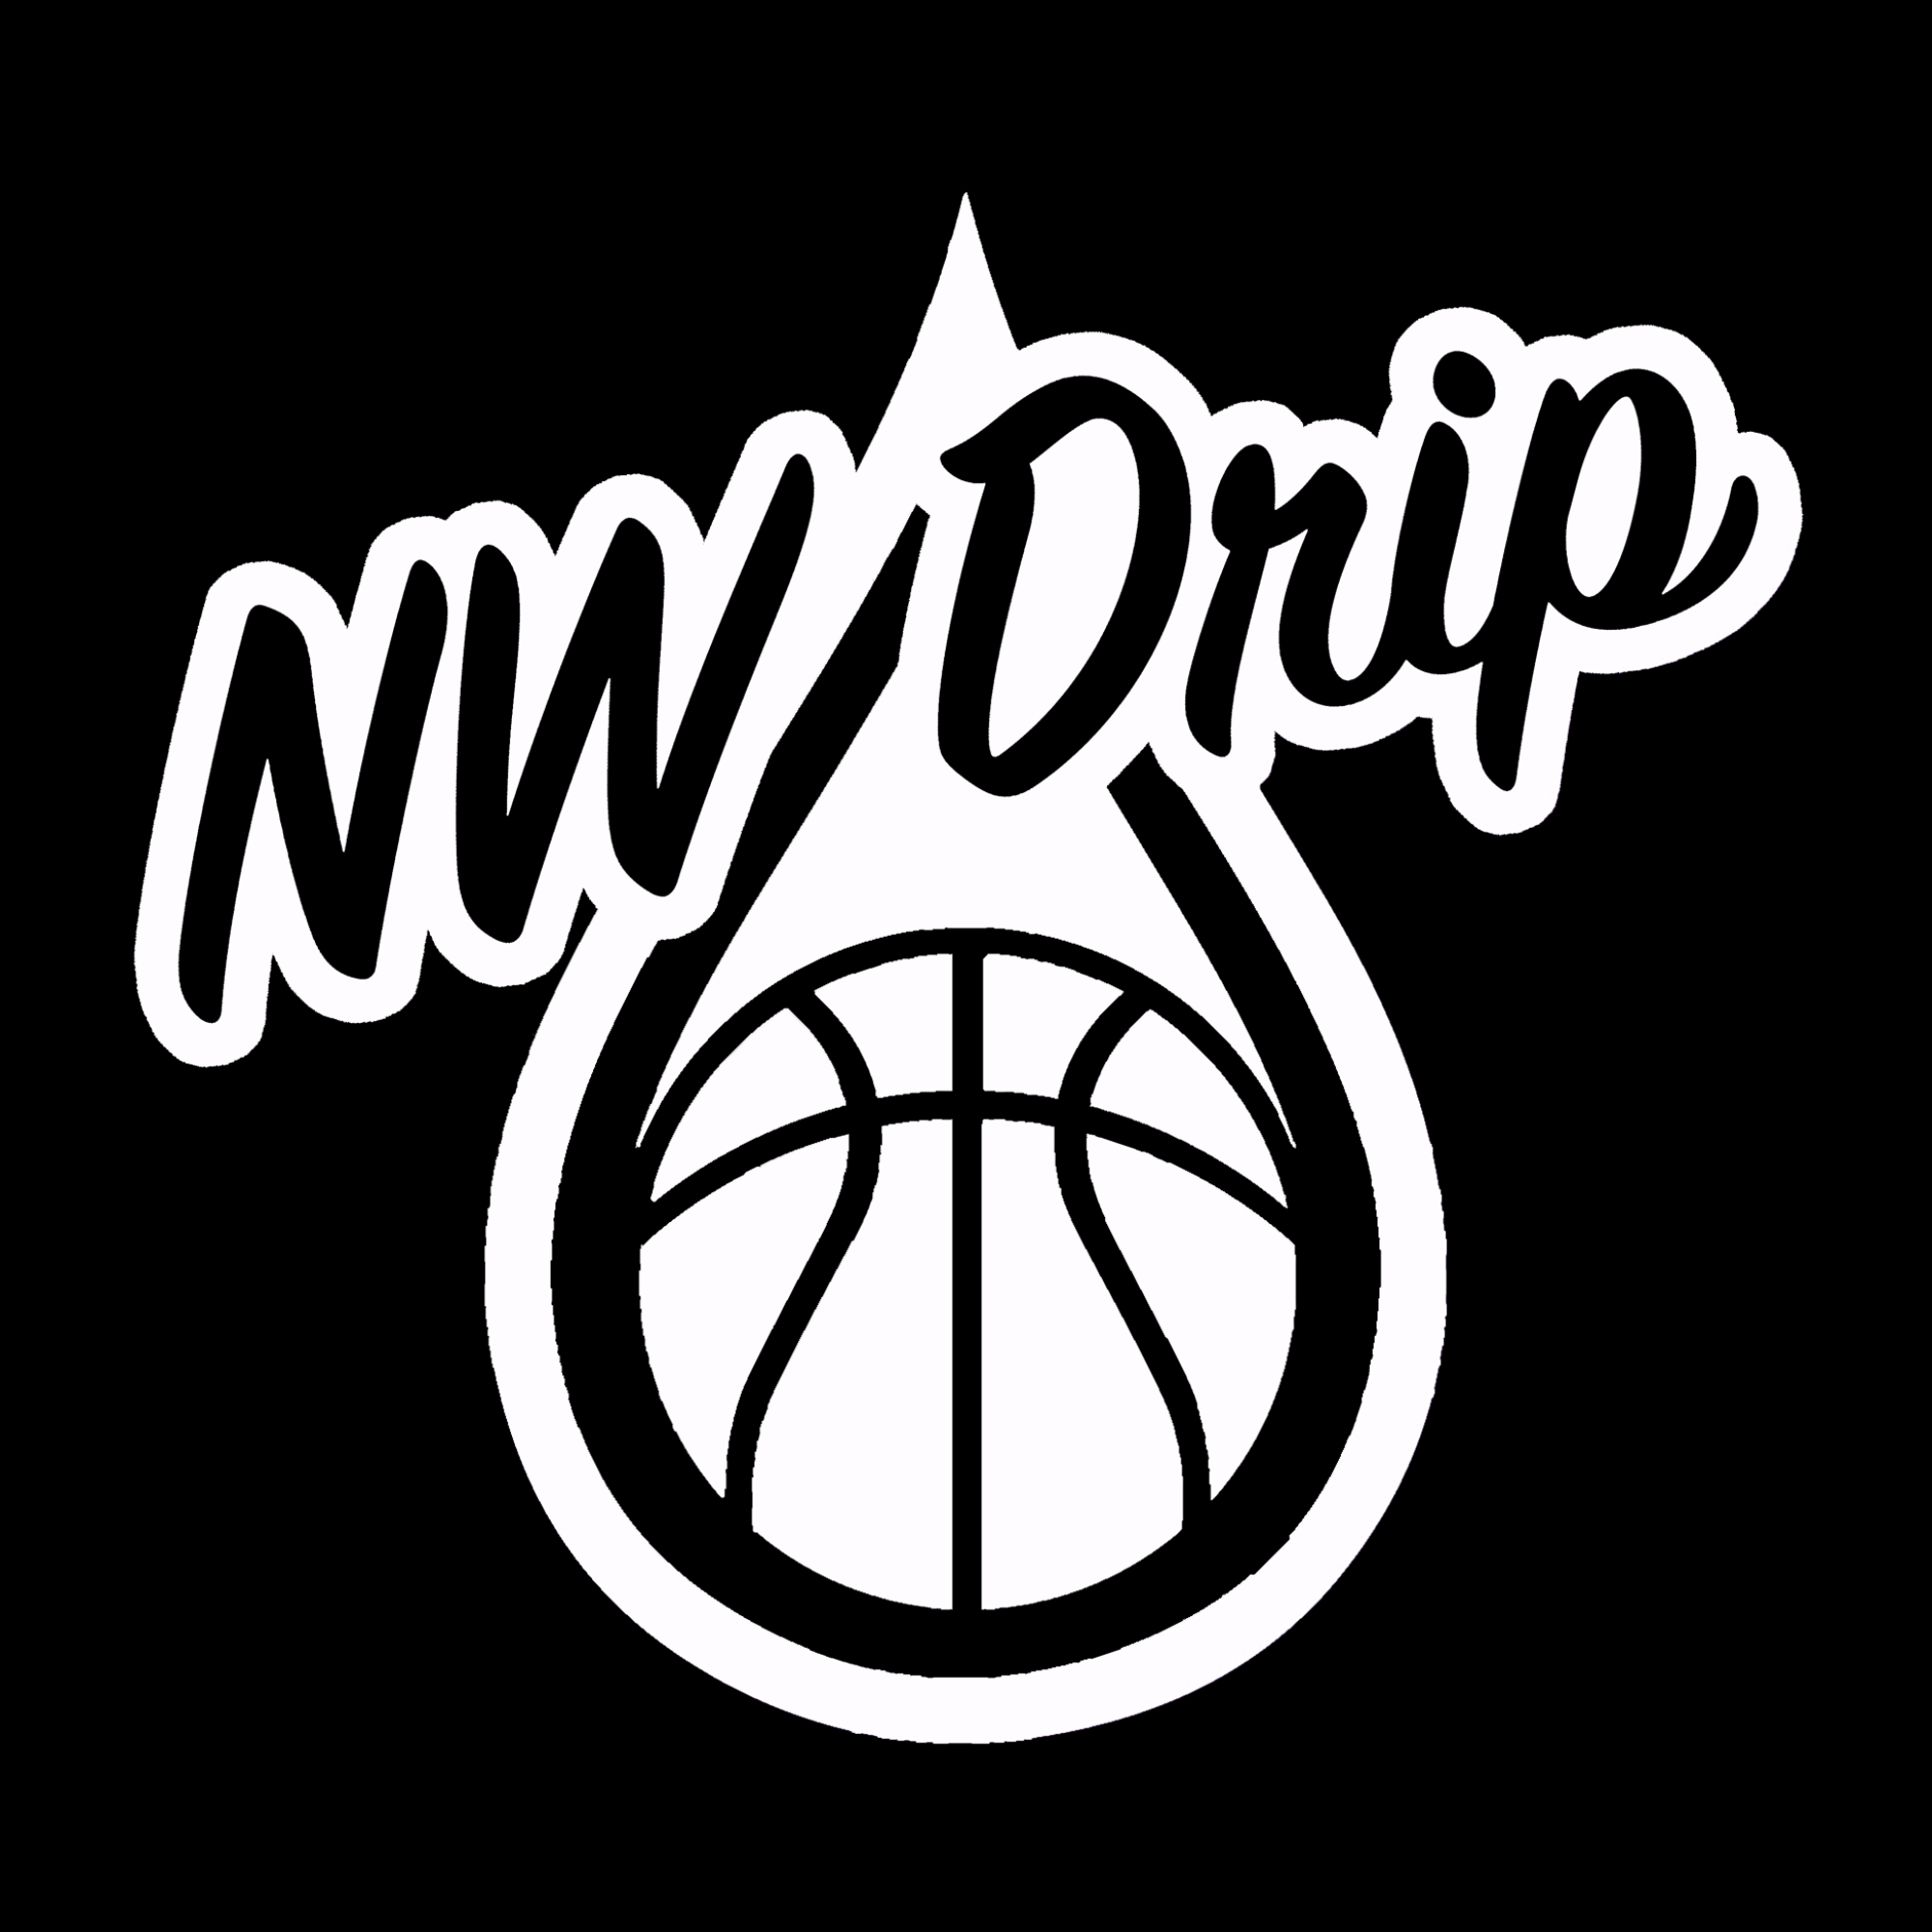 The official logo of NW Drip